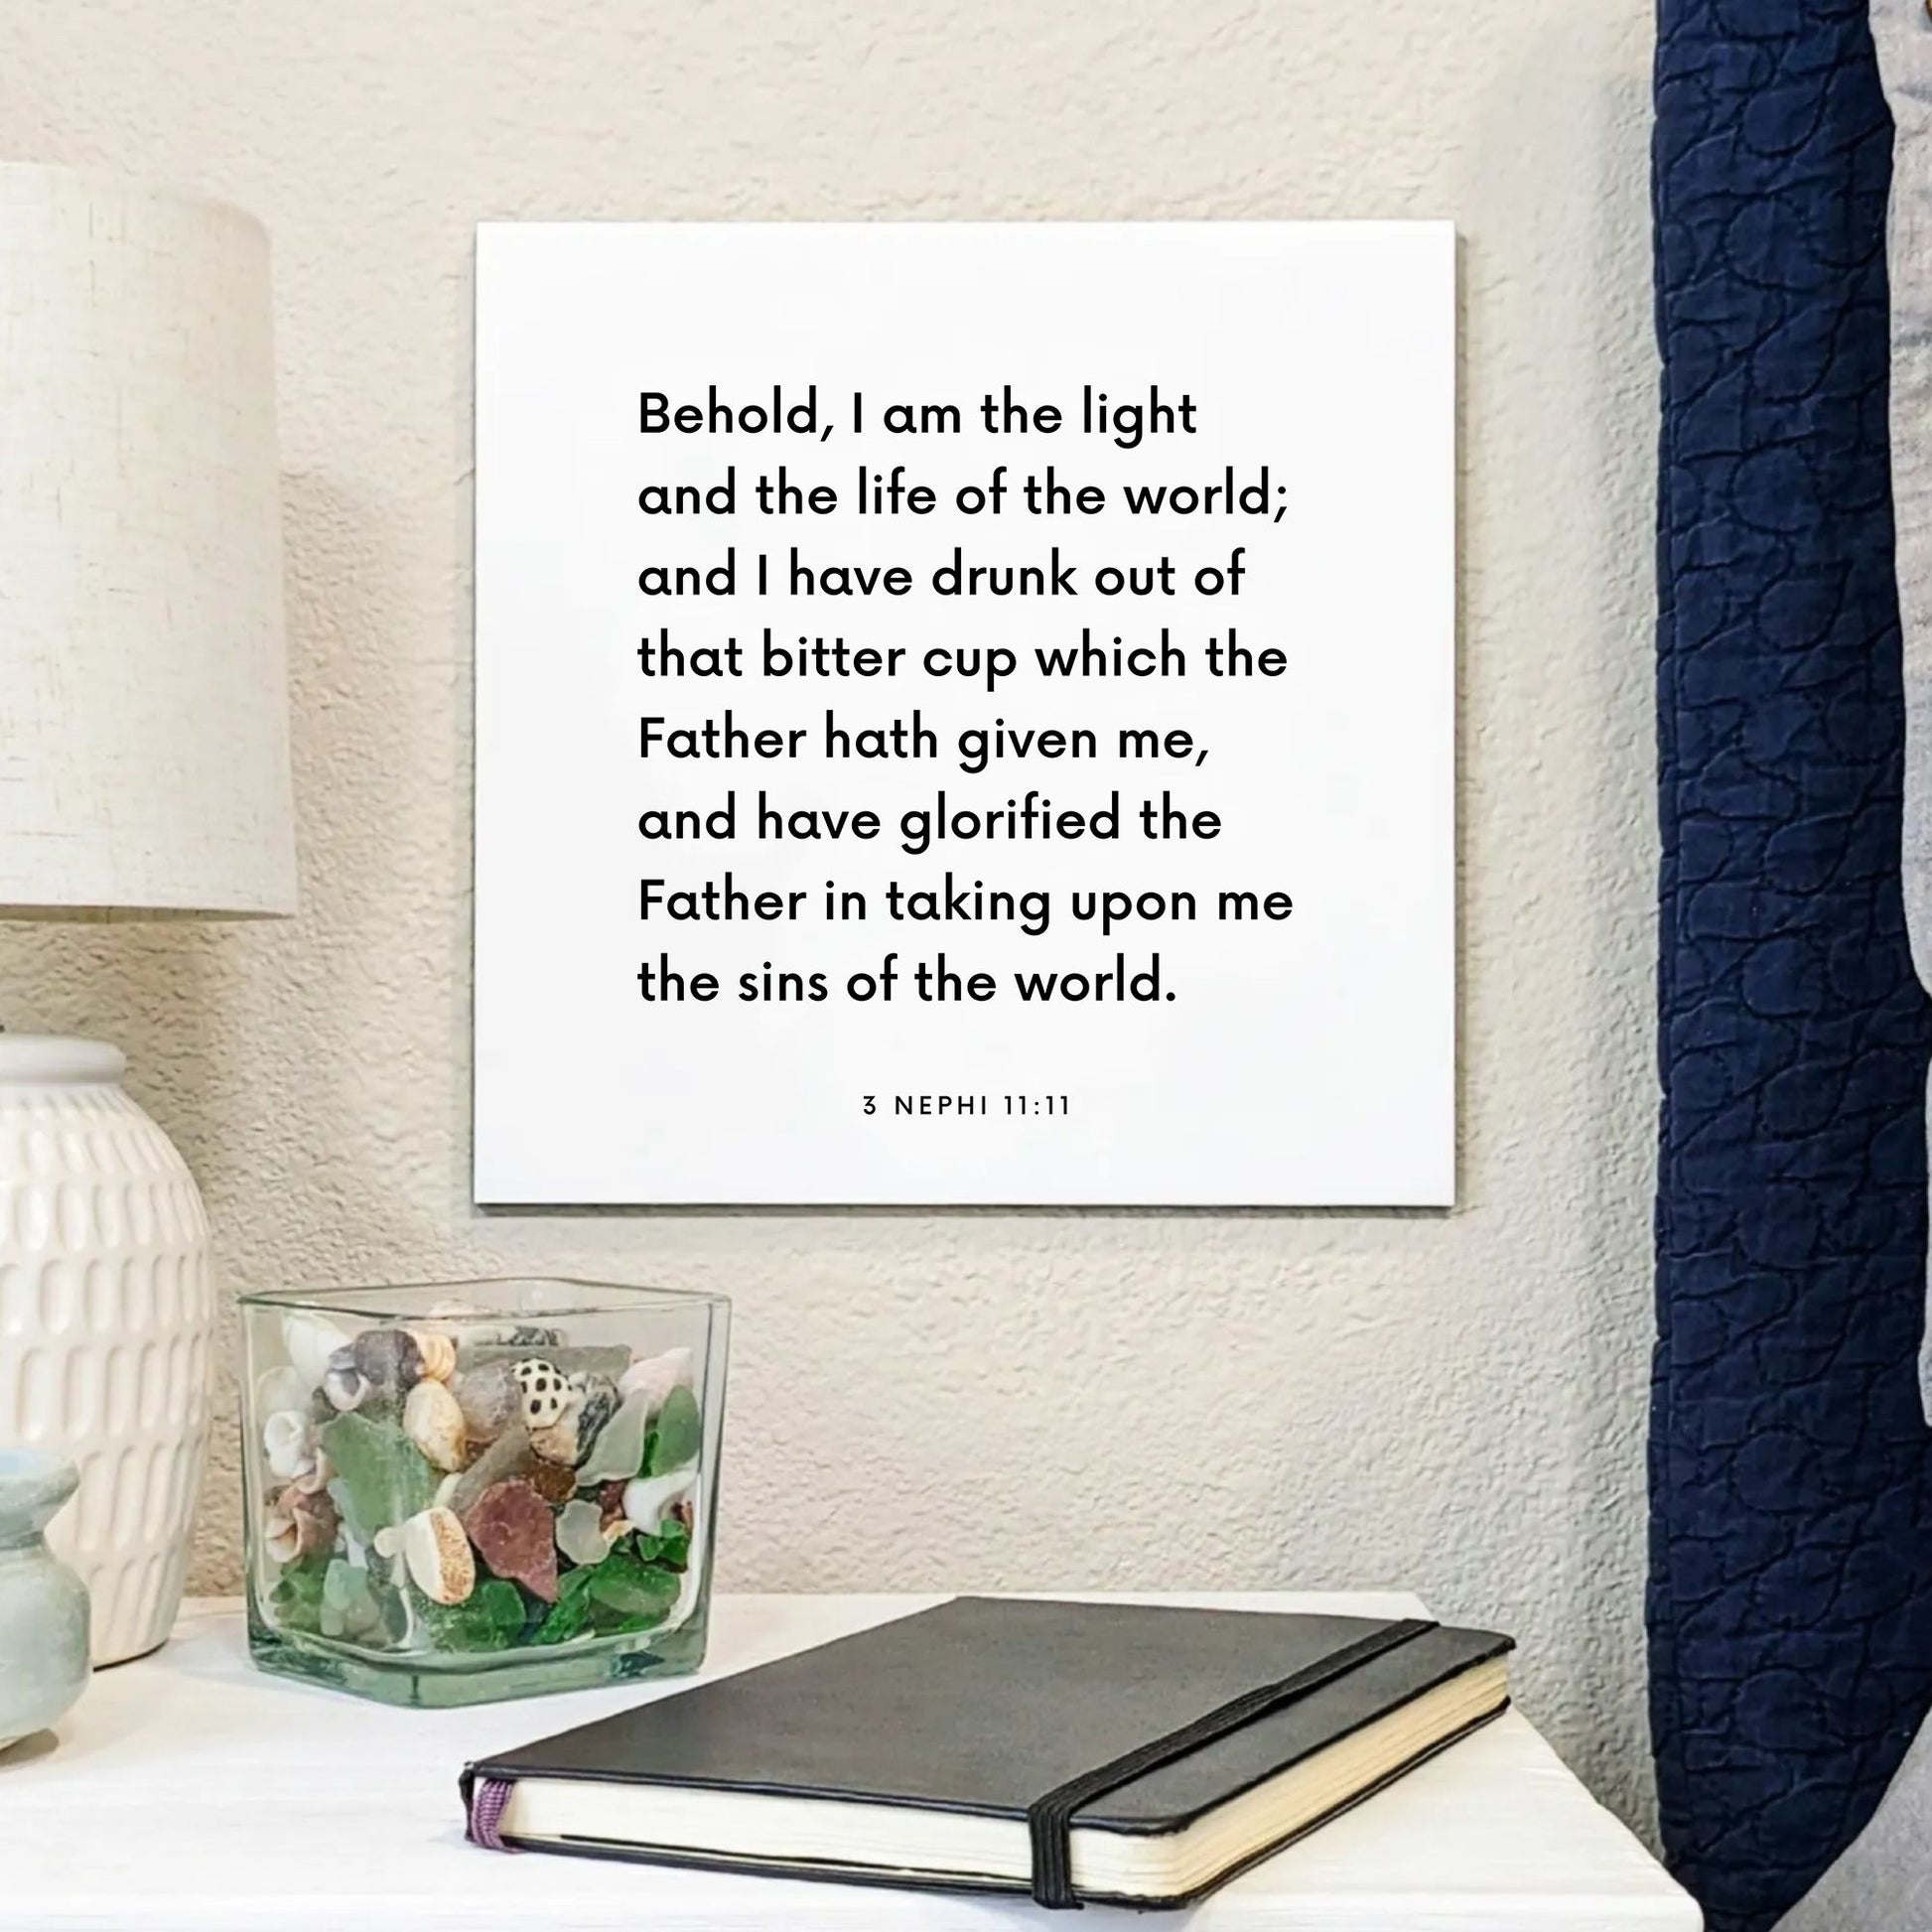 Bedside mouting of the scripture tile for 3 Nephi 11:11 - "Behold, I am the light and the life of the world"